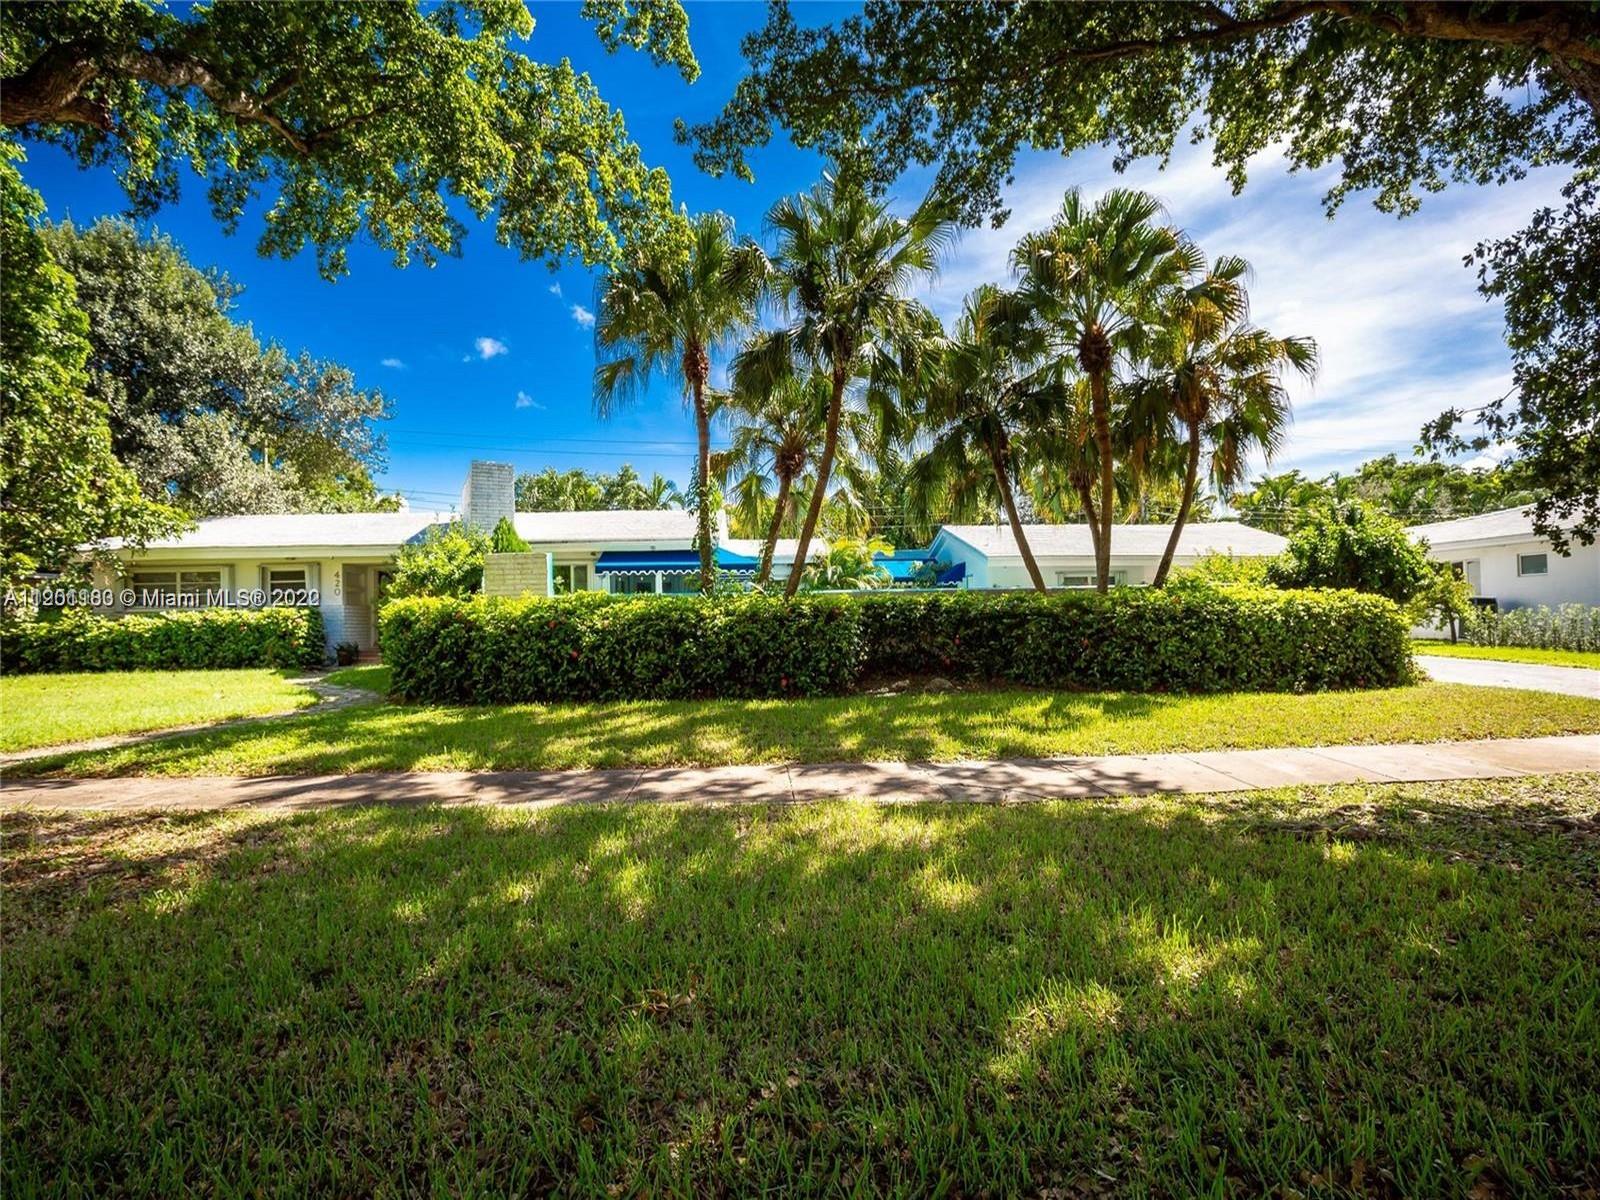 Beautiful oversized lot sitting in Coral Gables. Property consists of a main home with 3 beds/3 baths with a large great room & living room with vaulted ceilings, fireplace, dining area & an enclosed patio facing the pool area. The property also features a guest house that has its own room, living room and private bathroom.